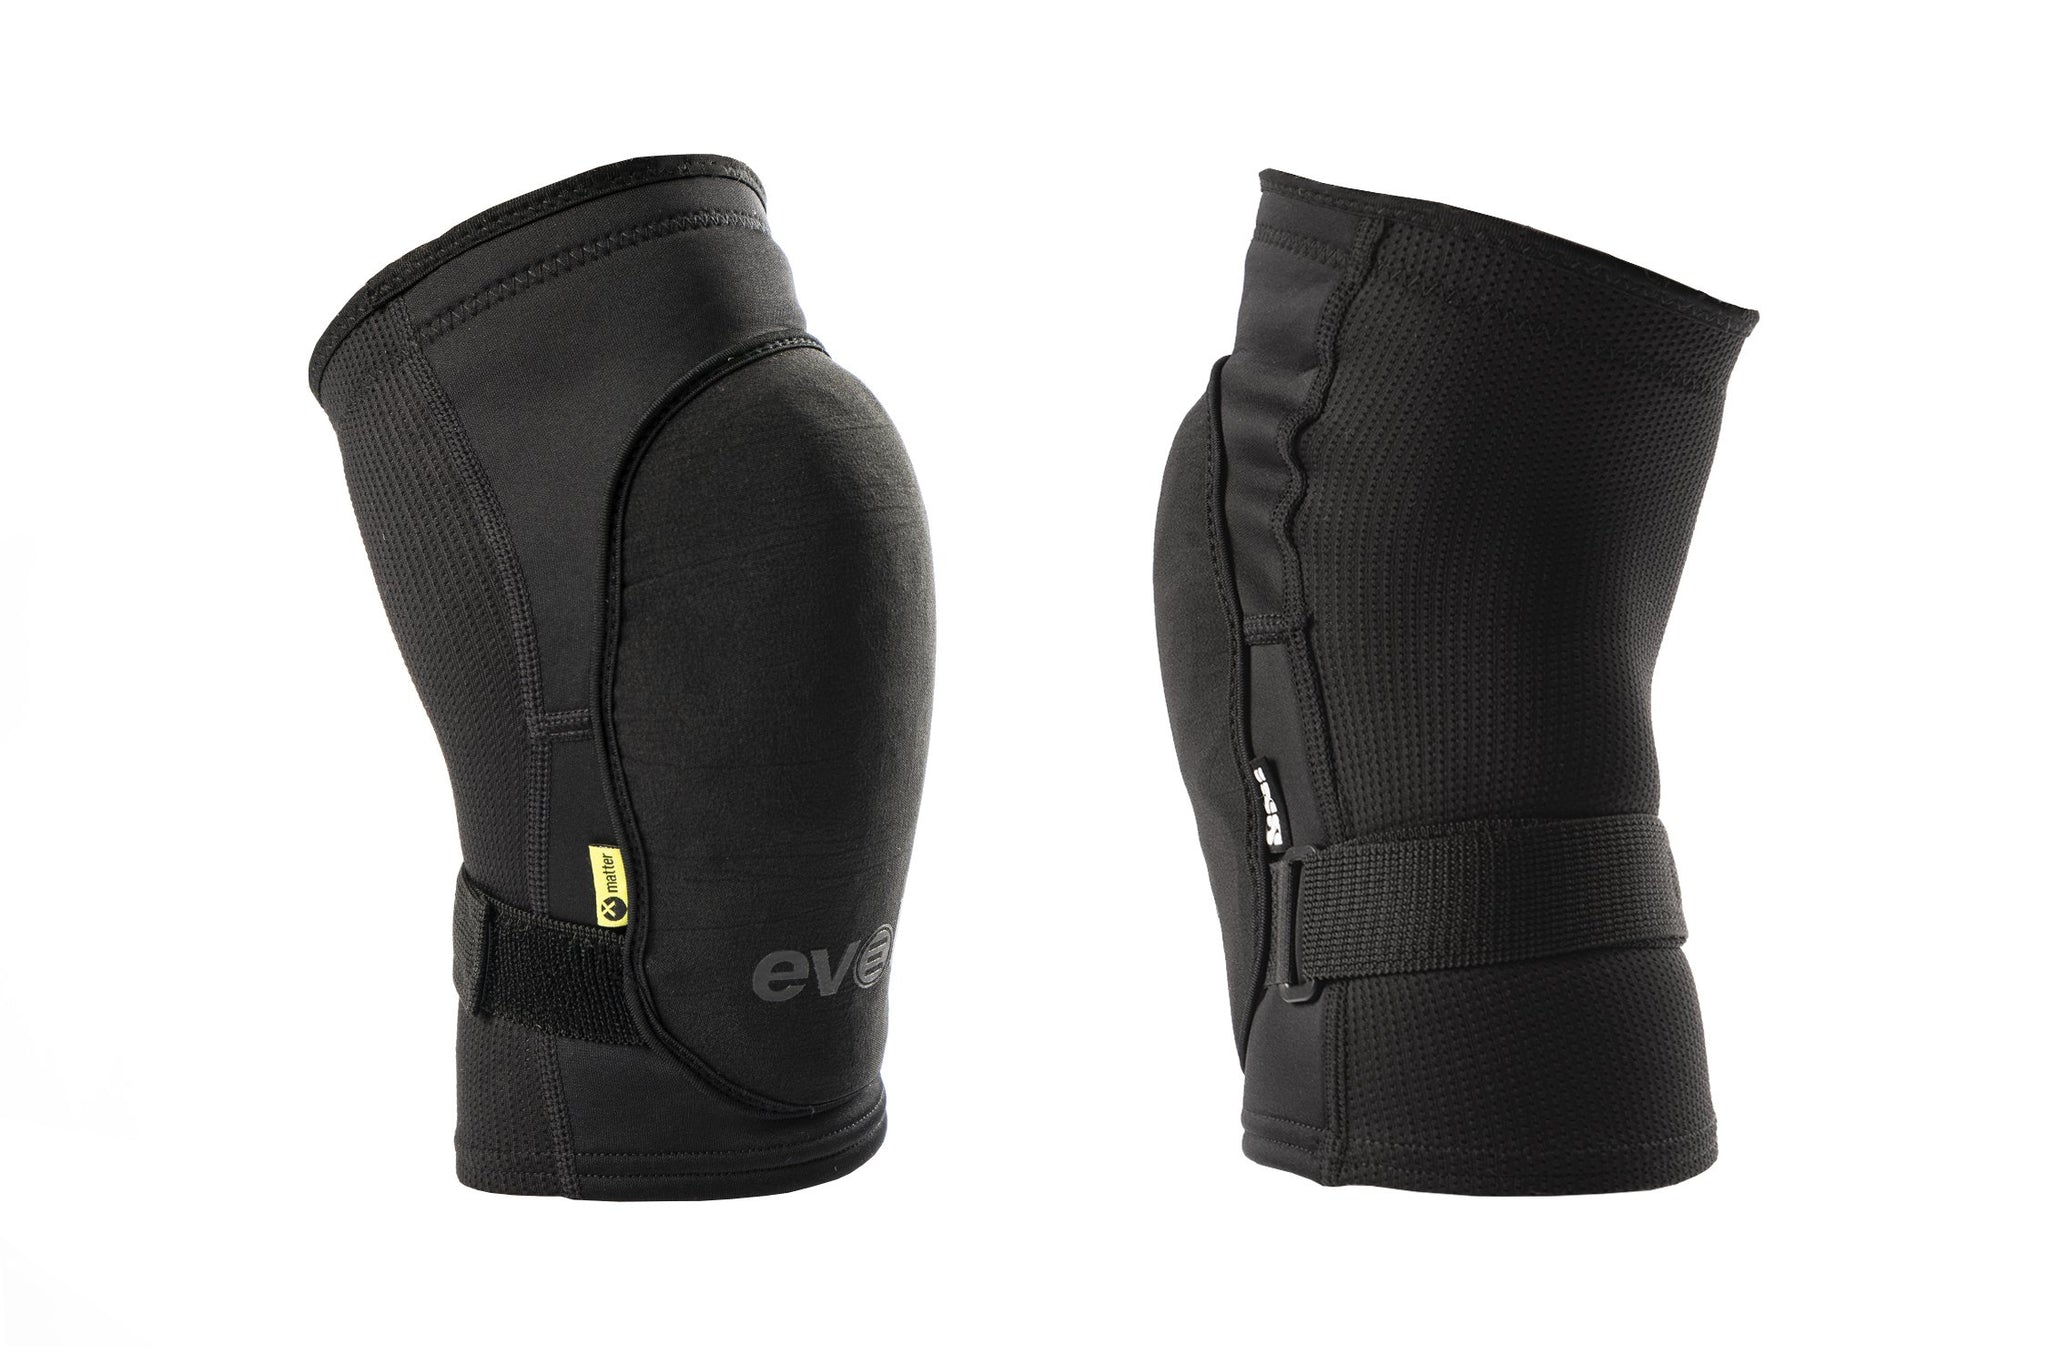 iXS Evolve Collaboration Safety Guards - Knee Pads